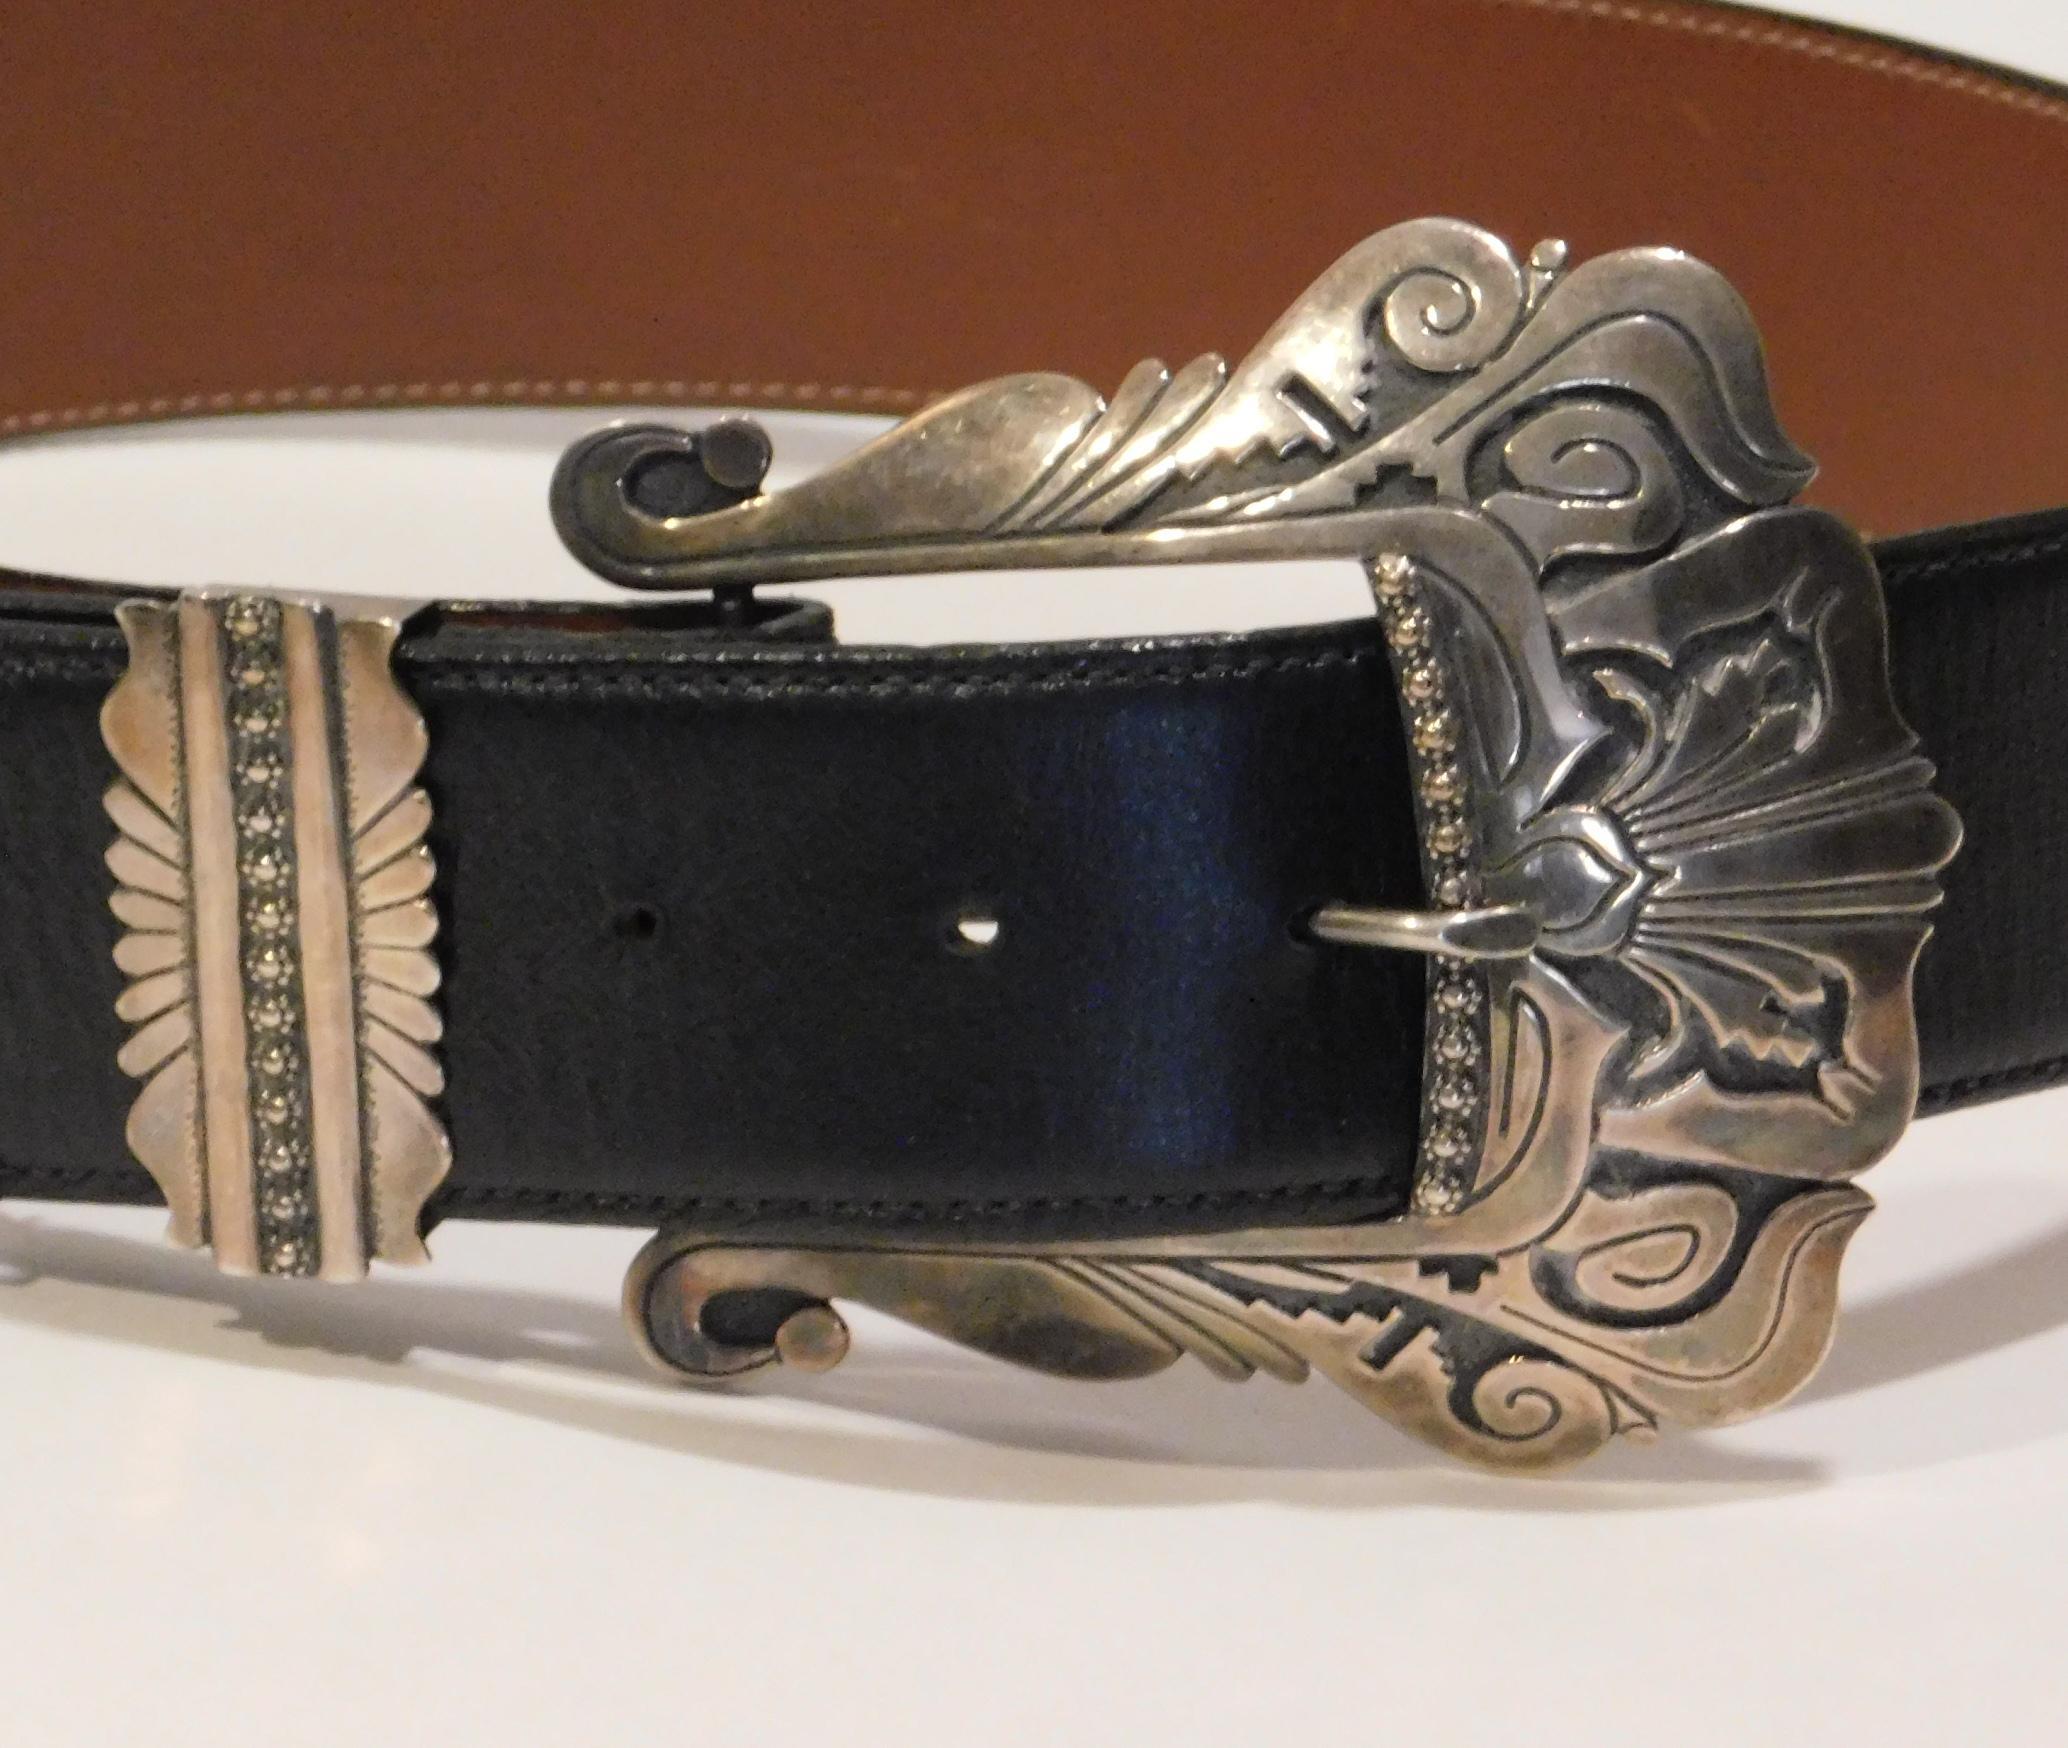 Tommy Singer Navajo Sterling Ranger Set - Buckle, Keep and Tip
This large beautifully crafted buckle set was made circa 1980's. 
It is in excellent condition and signed 